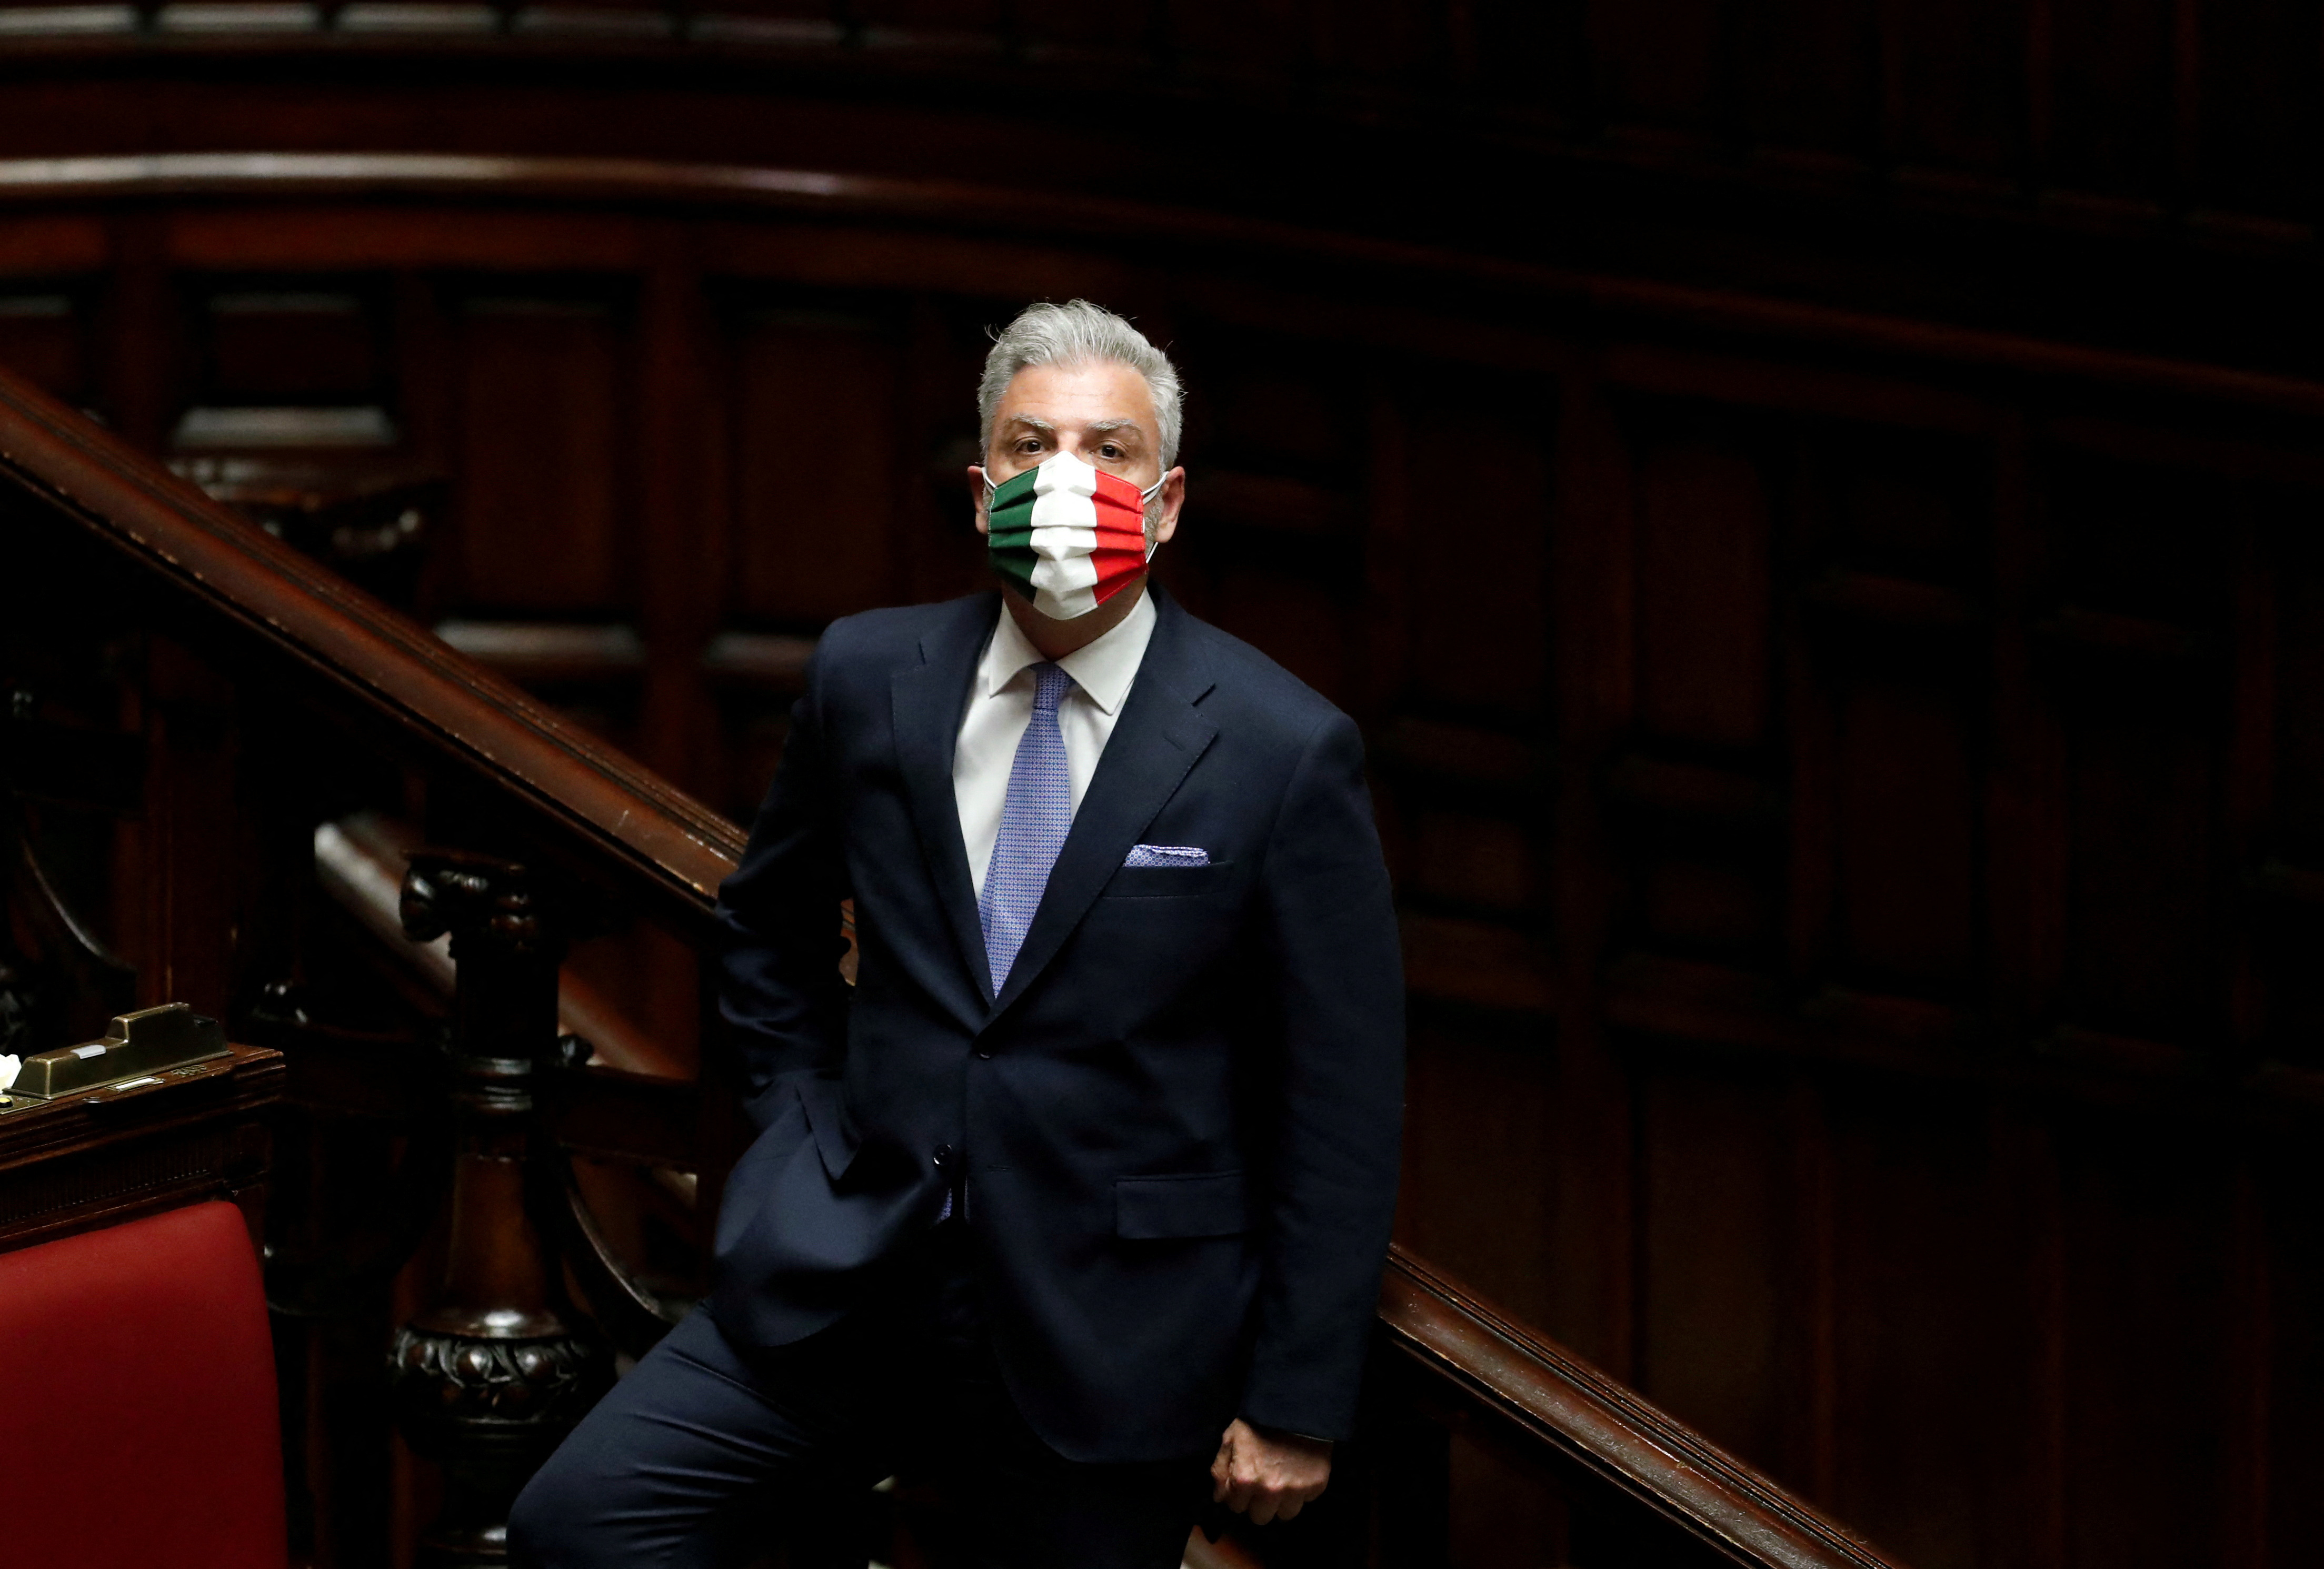 Brothers of Italy party member Federico Mollicone is seen wearing a face mask with the colours of the Italian flag, during a session of the lower house of parliament on the coronavirus disease (COVID-19), in Rome